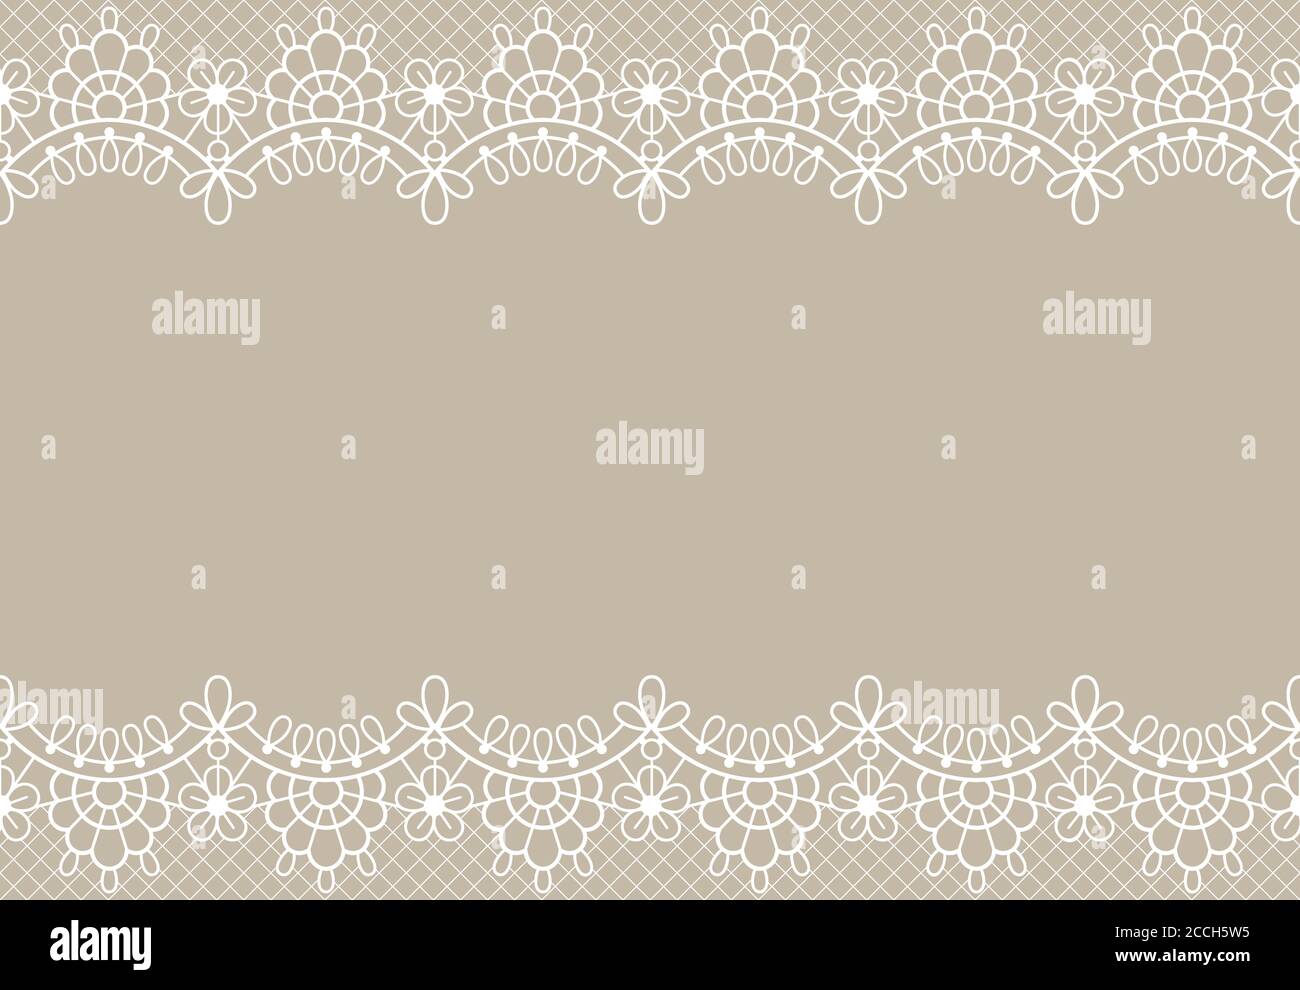 Horizontally seamless beige lace background with lace borders